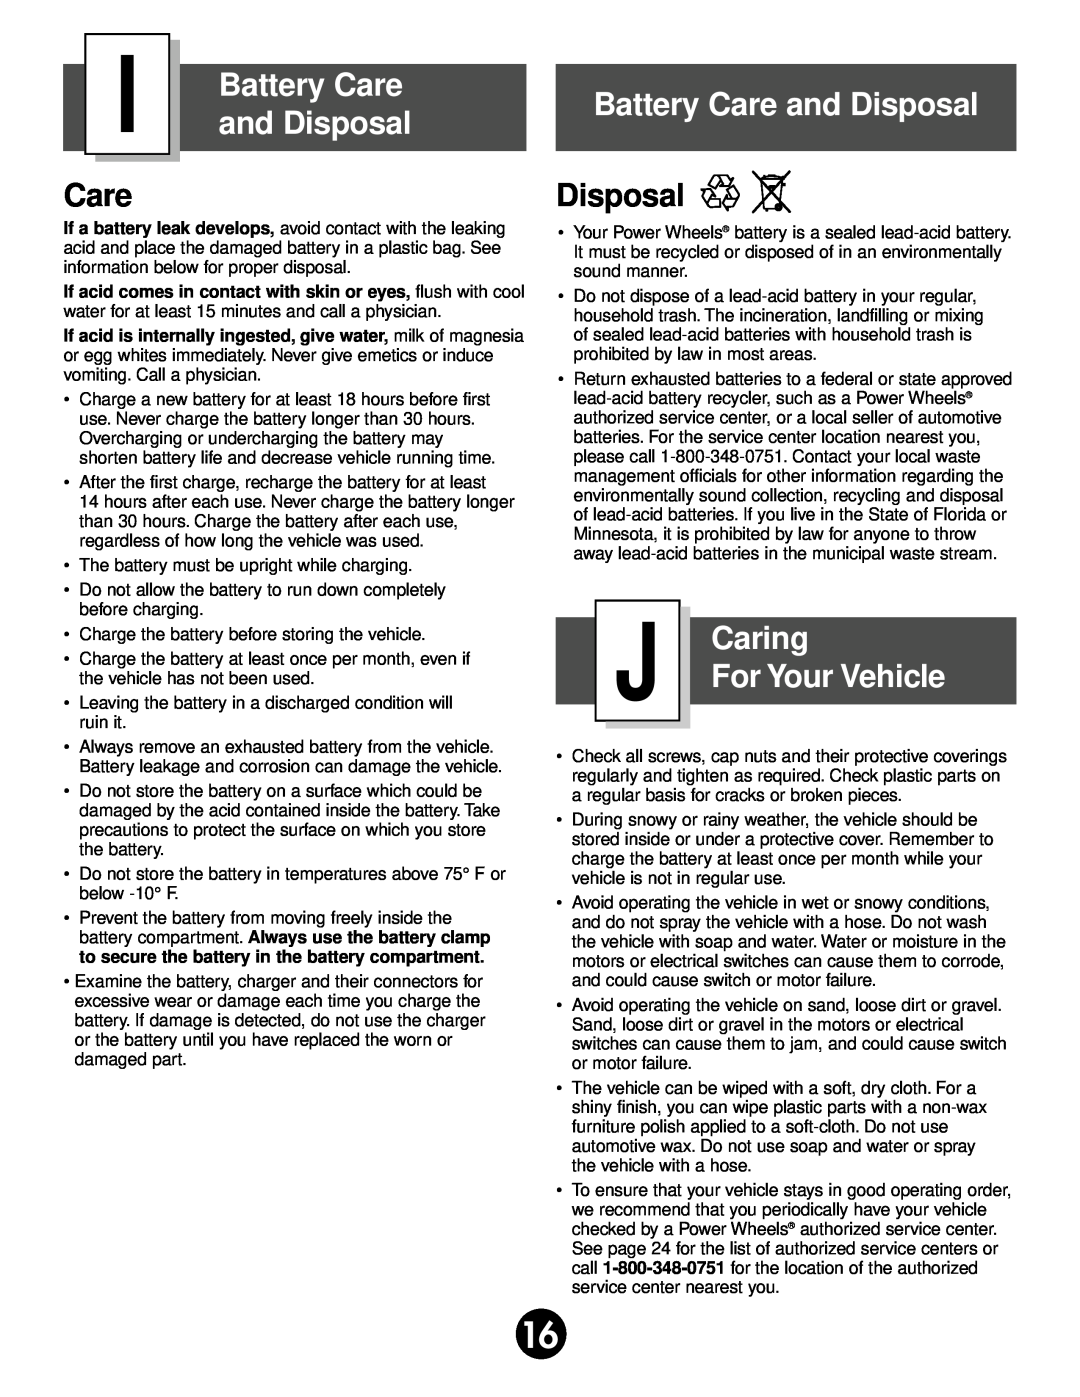 Fisher-Price 75320 owner manual Battery Care and Disposal, Caring, For Your Vehicle 